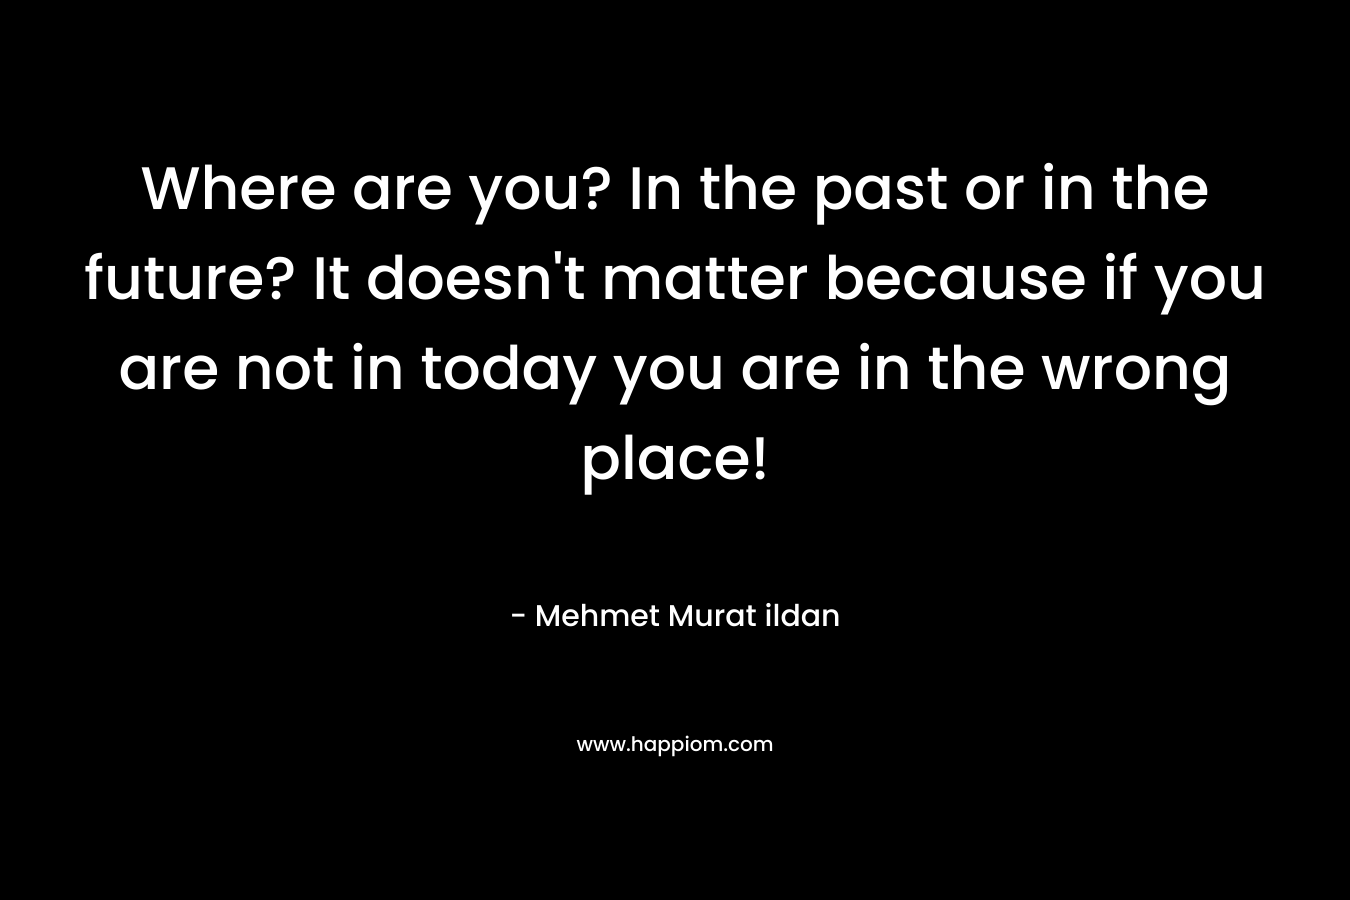 Where are you? In the past or in the future? It doesn't matter because if you are not in today you are in the wrong place!